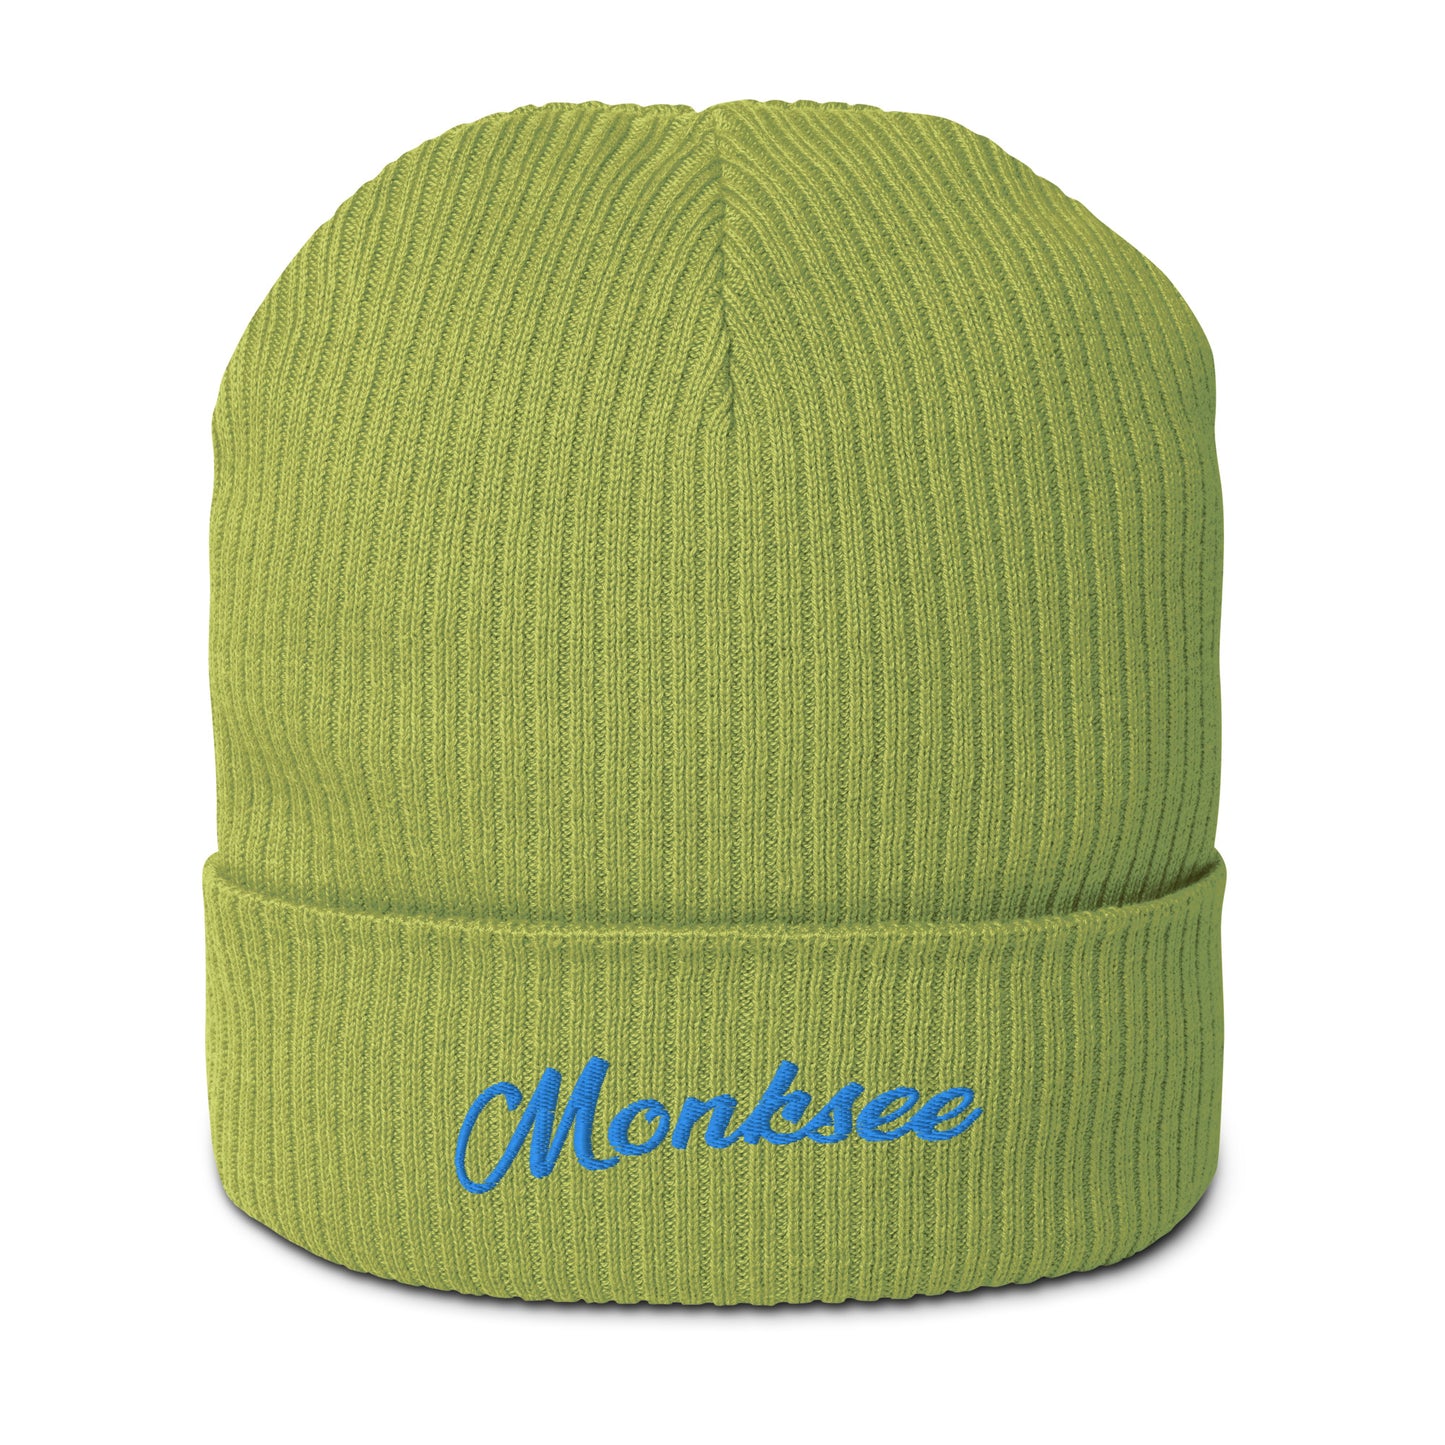 Lime Organic ribbed beanie by Monksee.